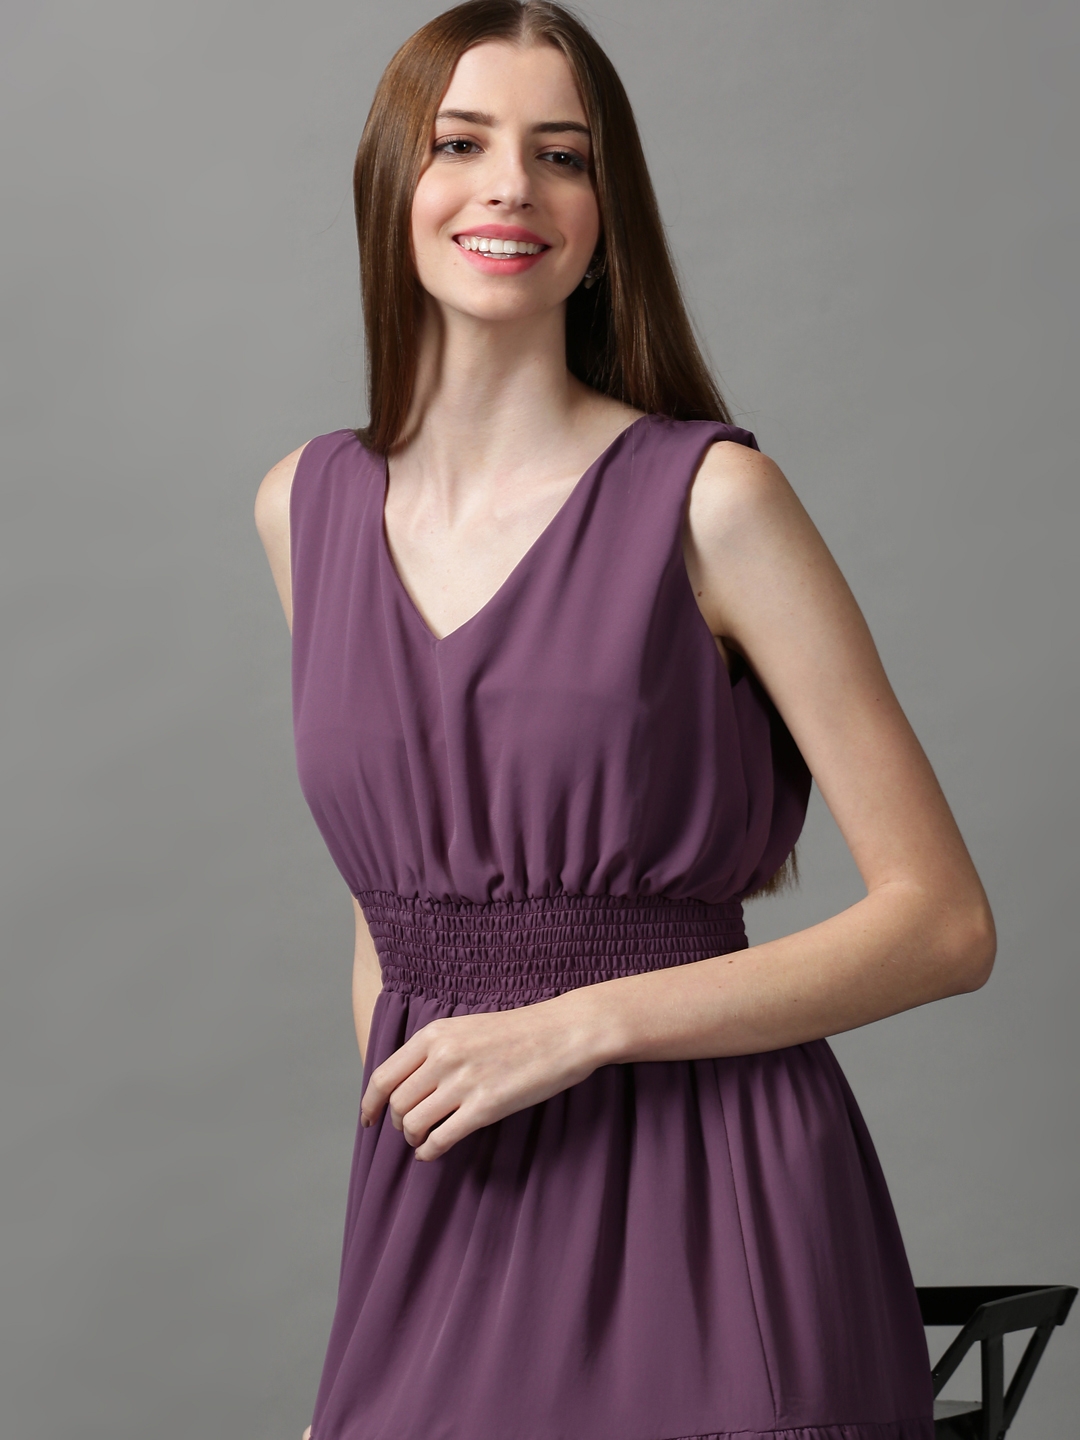 Women's Purple Polyester Solid Dresses